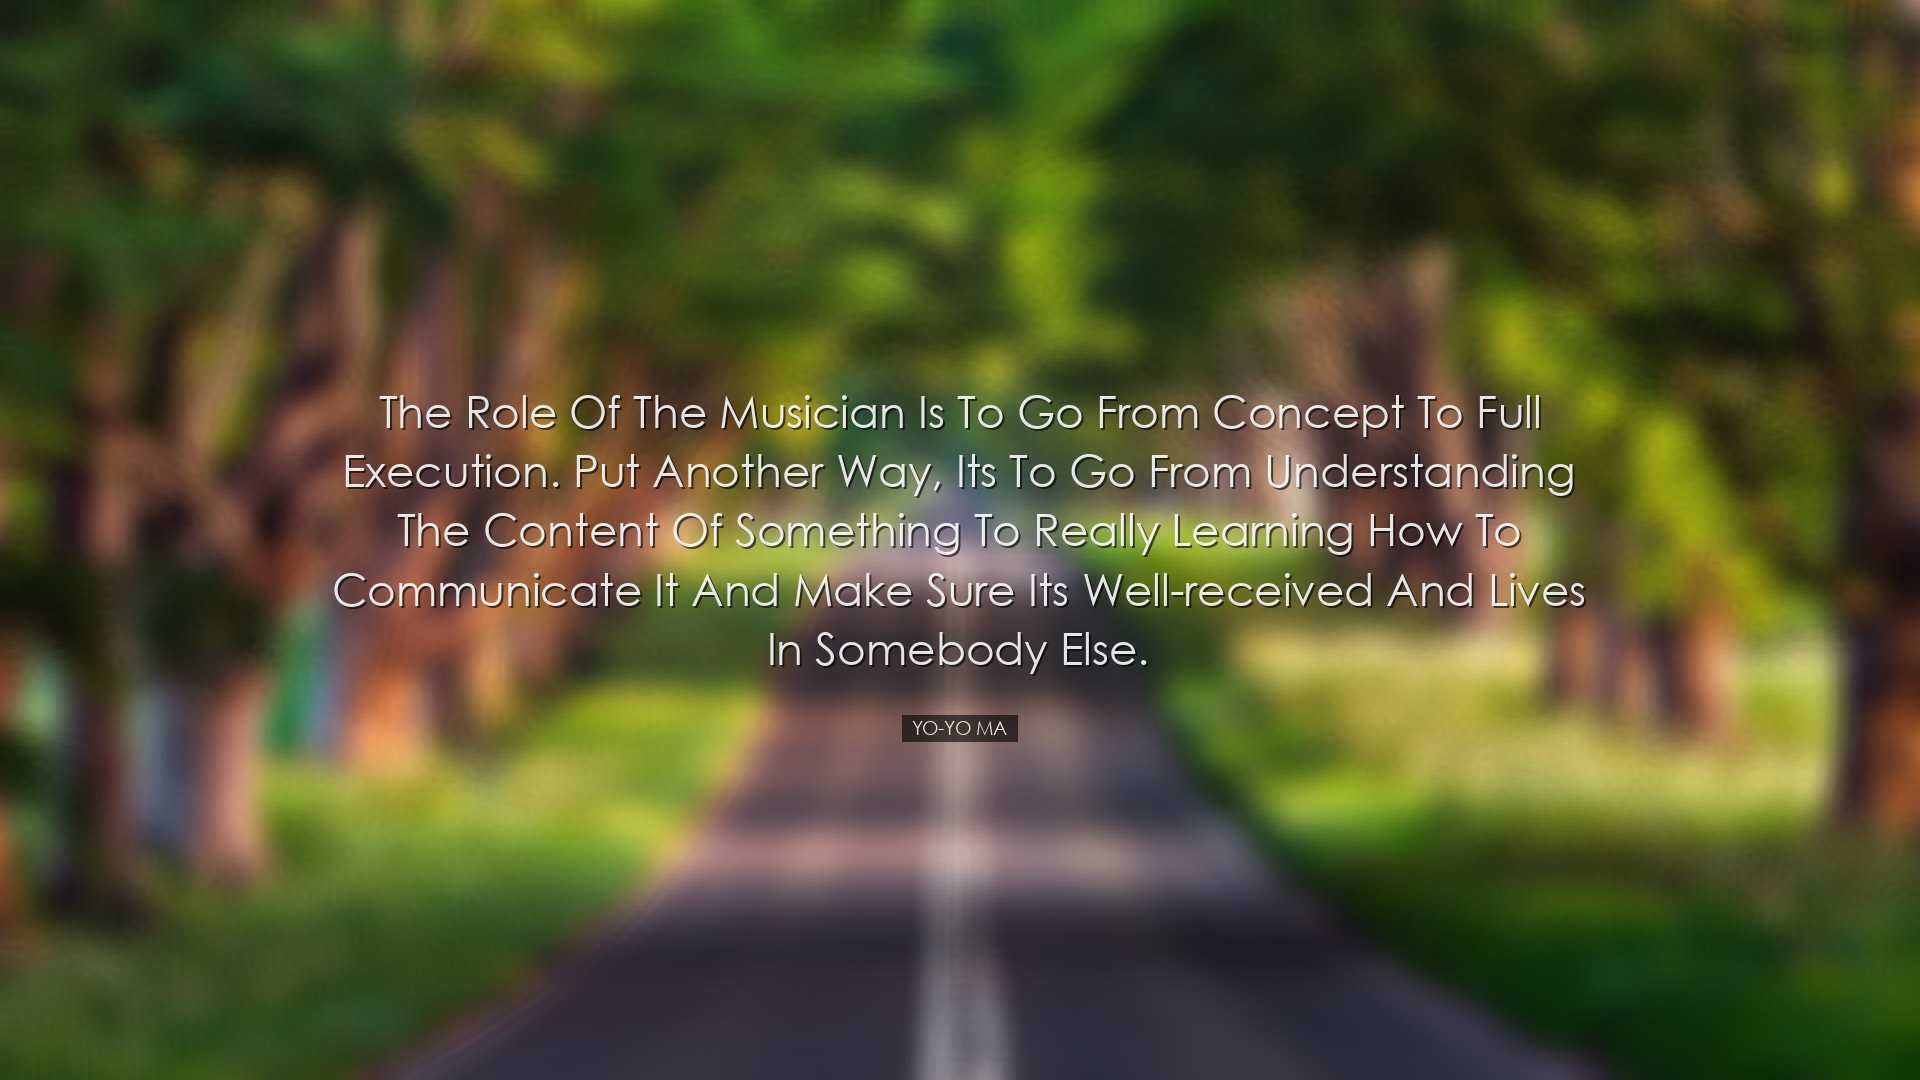 The role of the musician is to go from concept to full execution.